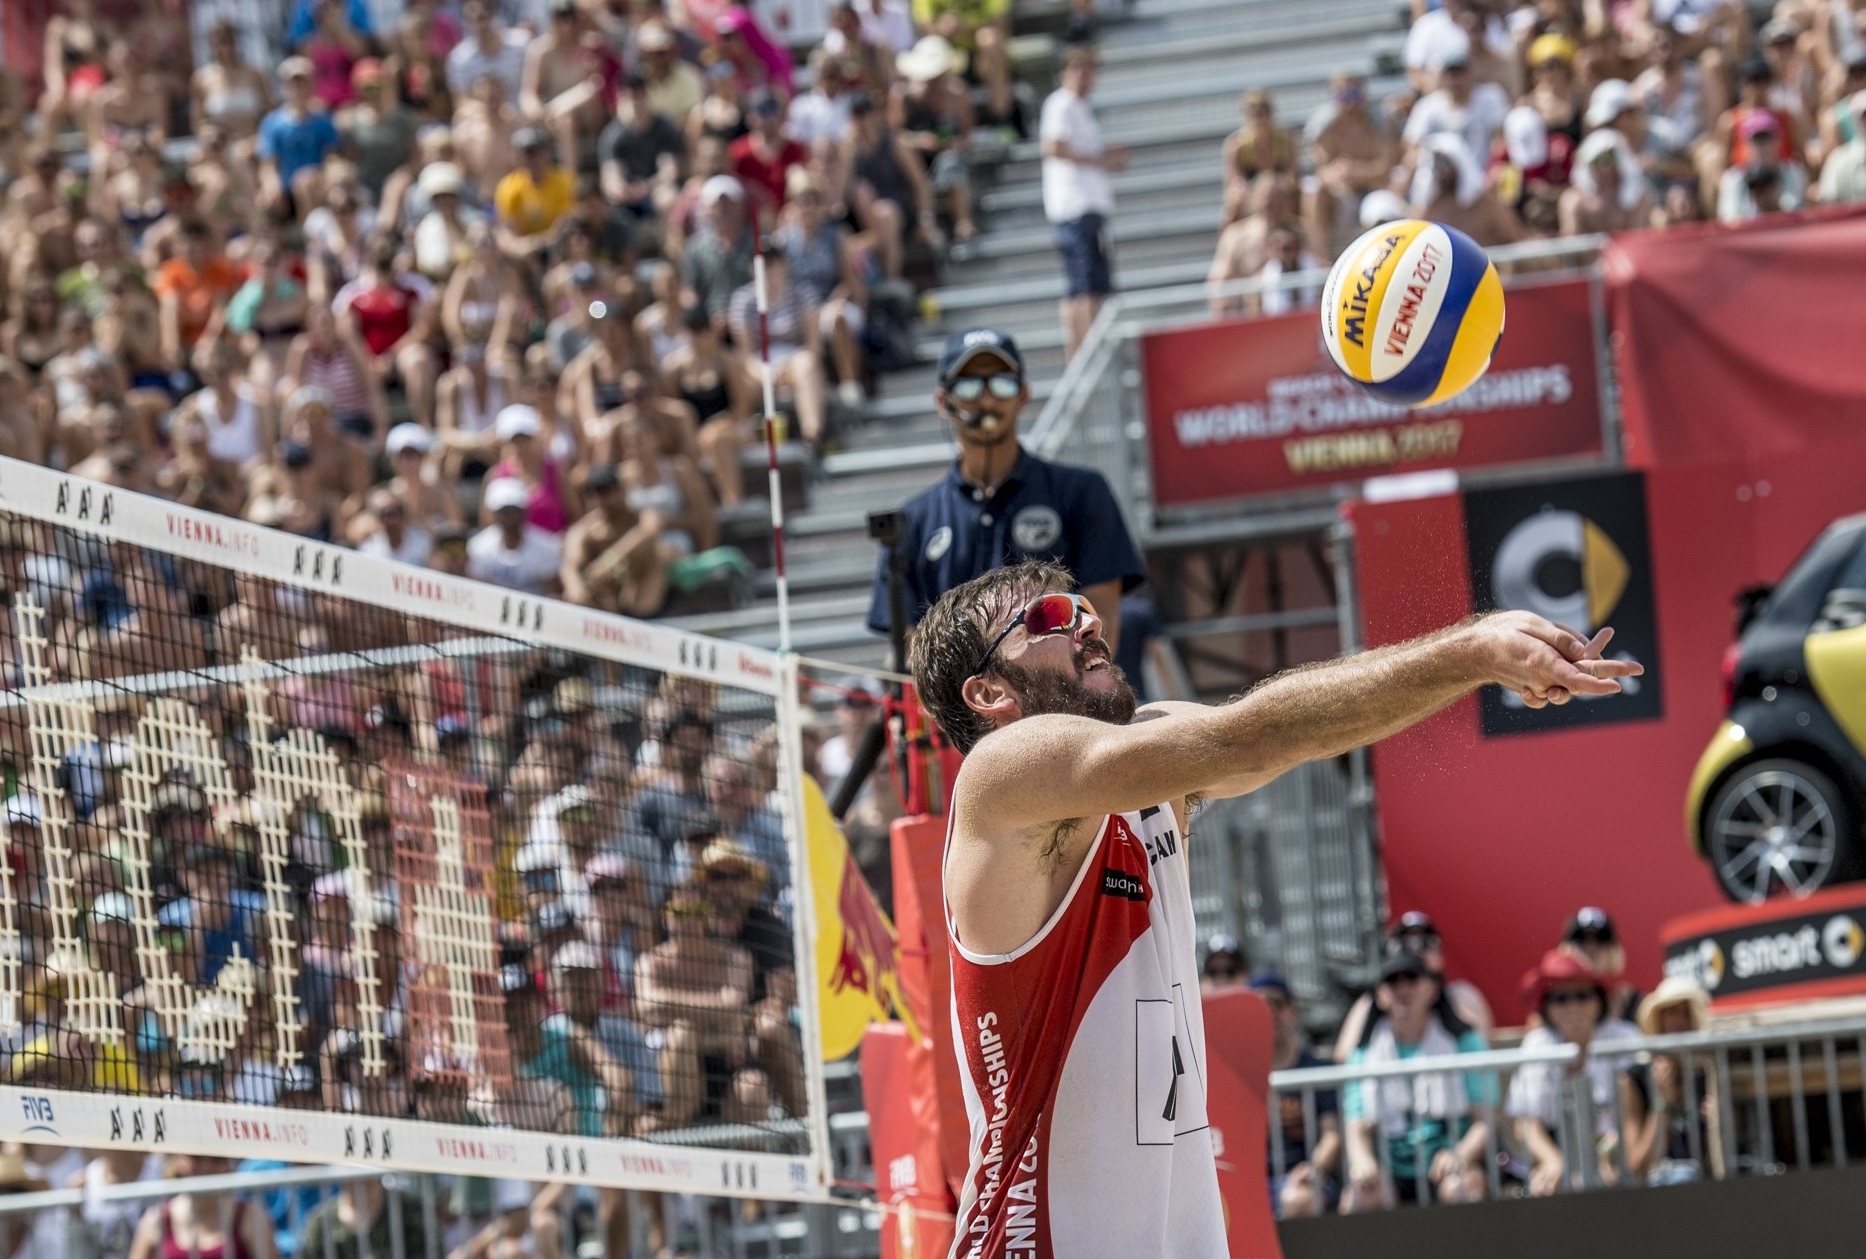 Ben sets as a packed Red Bull Beach Arena looks on during the World Championships in Vienna